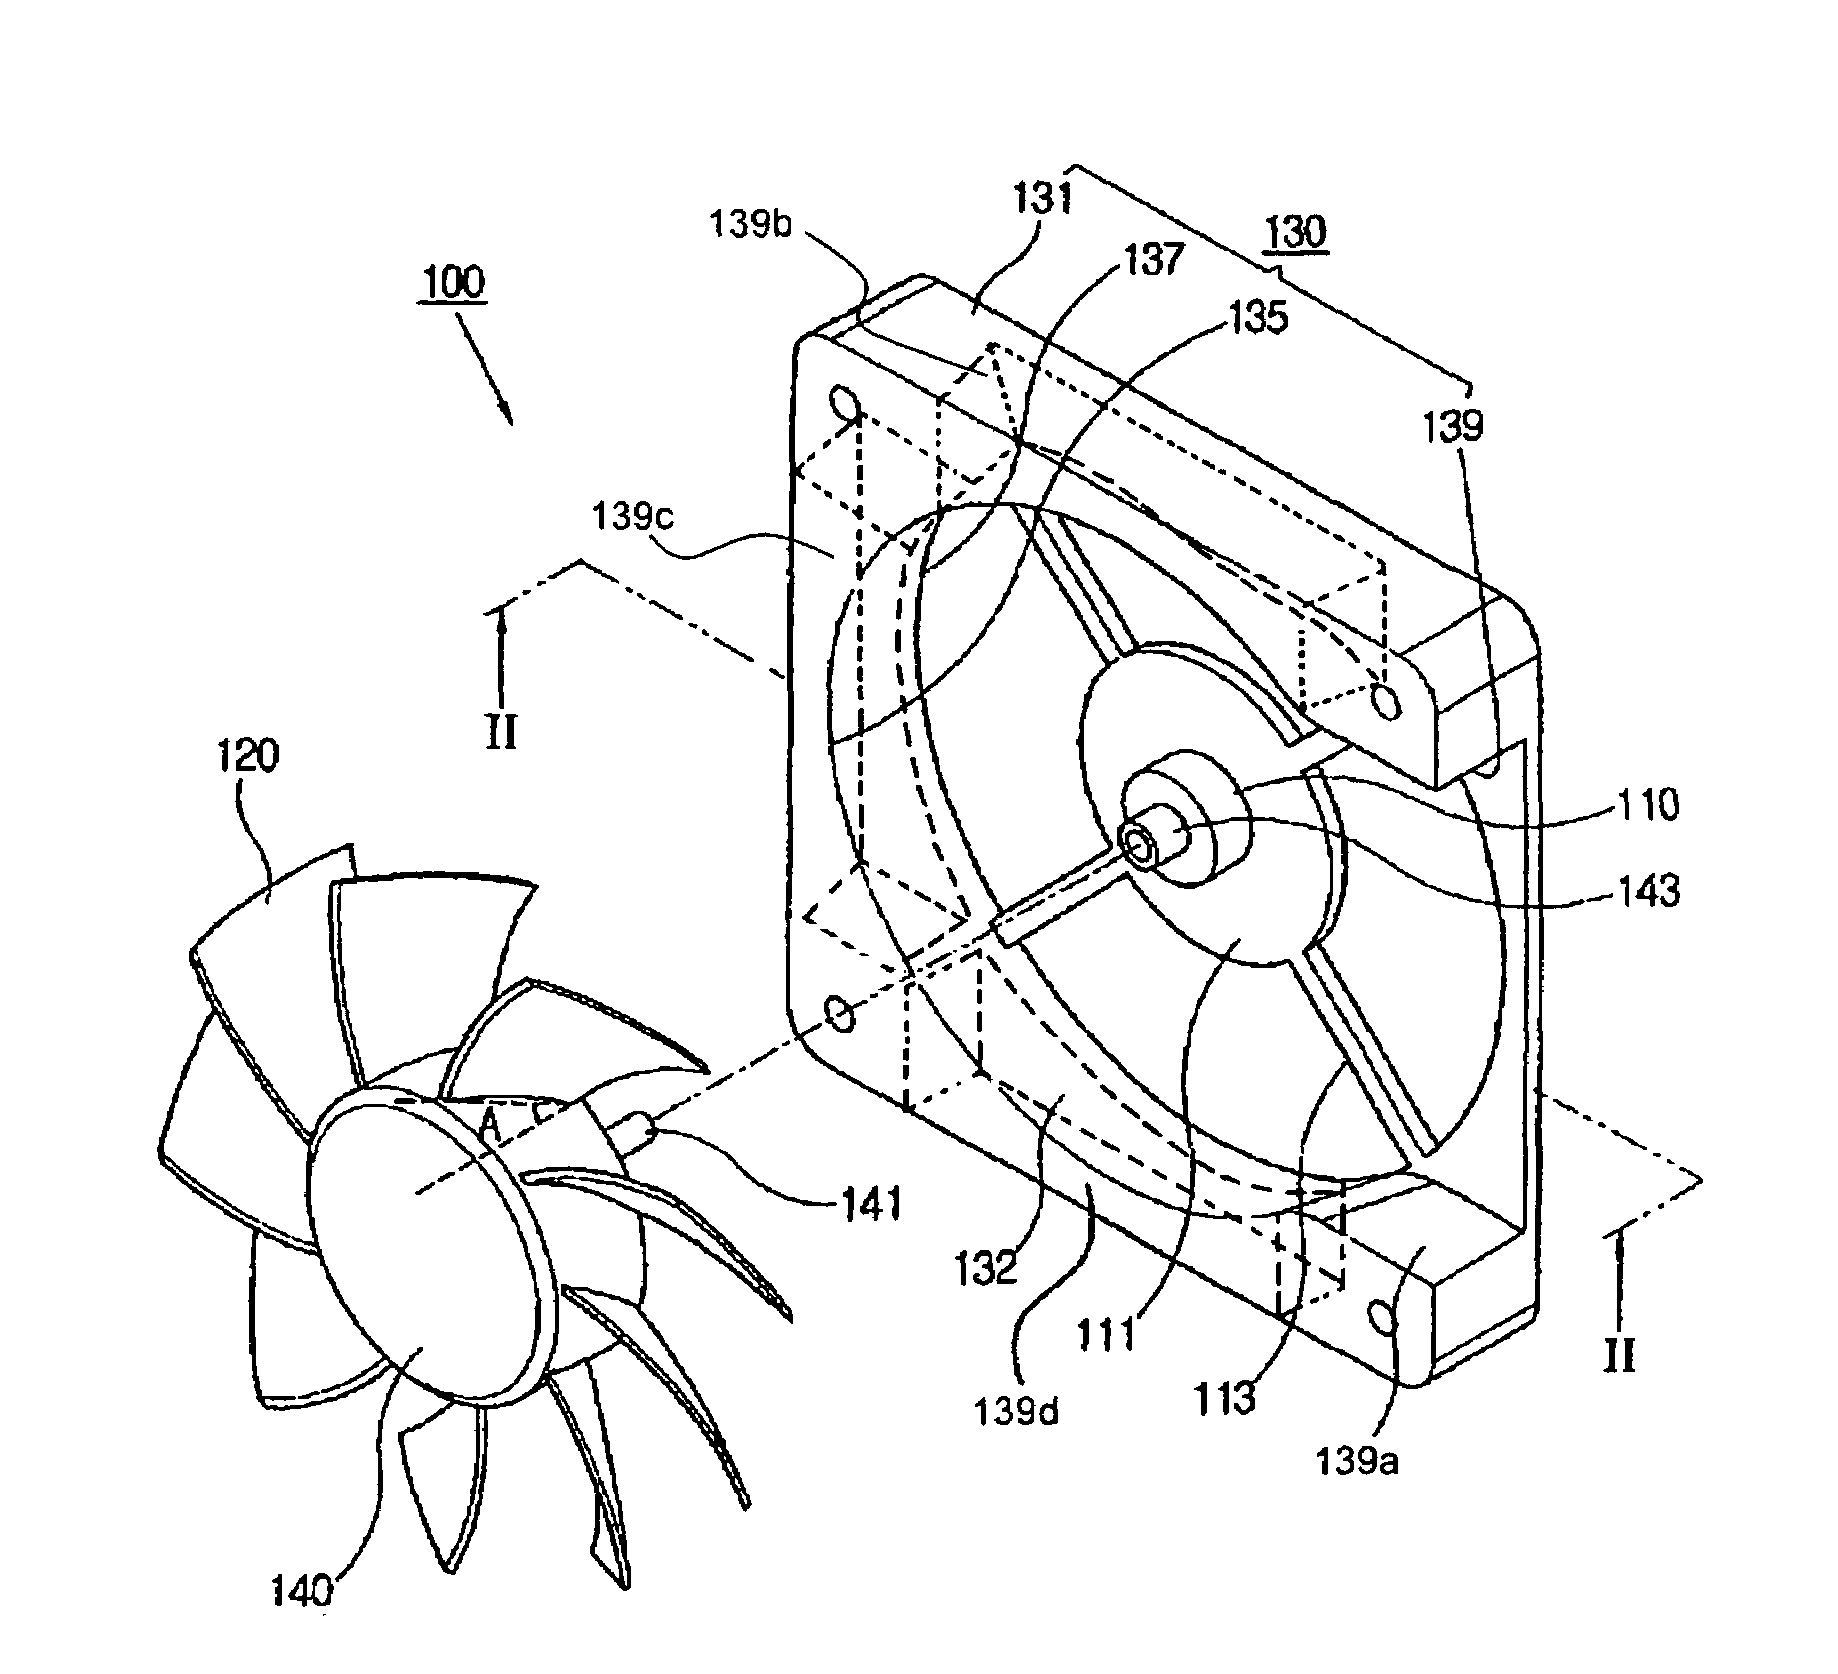 Fan to generate air flow in axial and radial directions